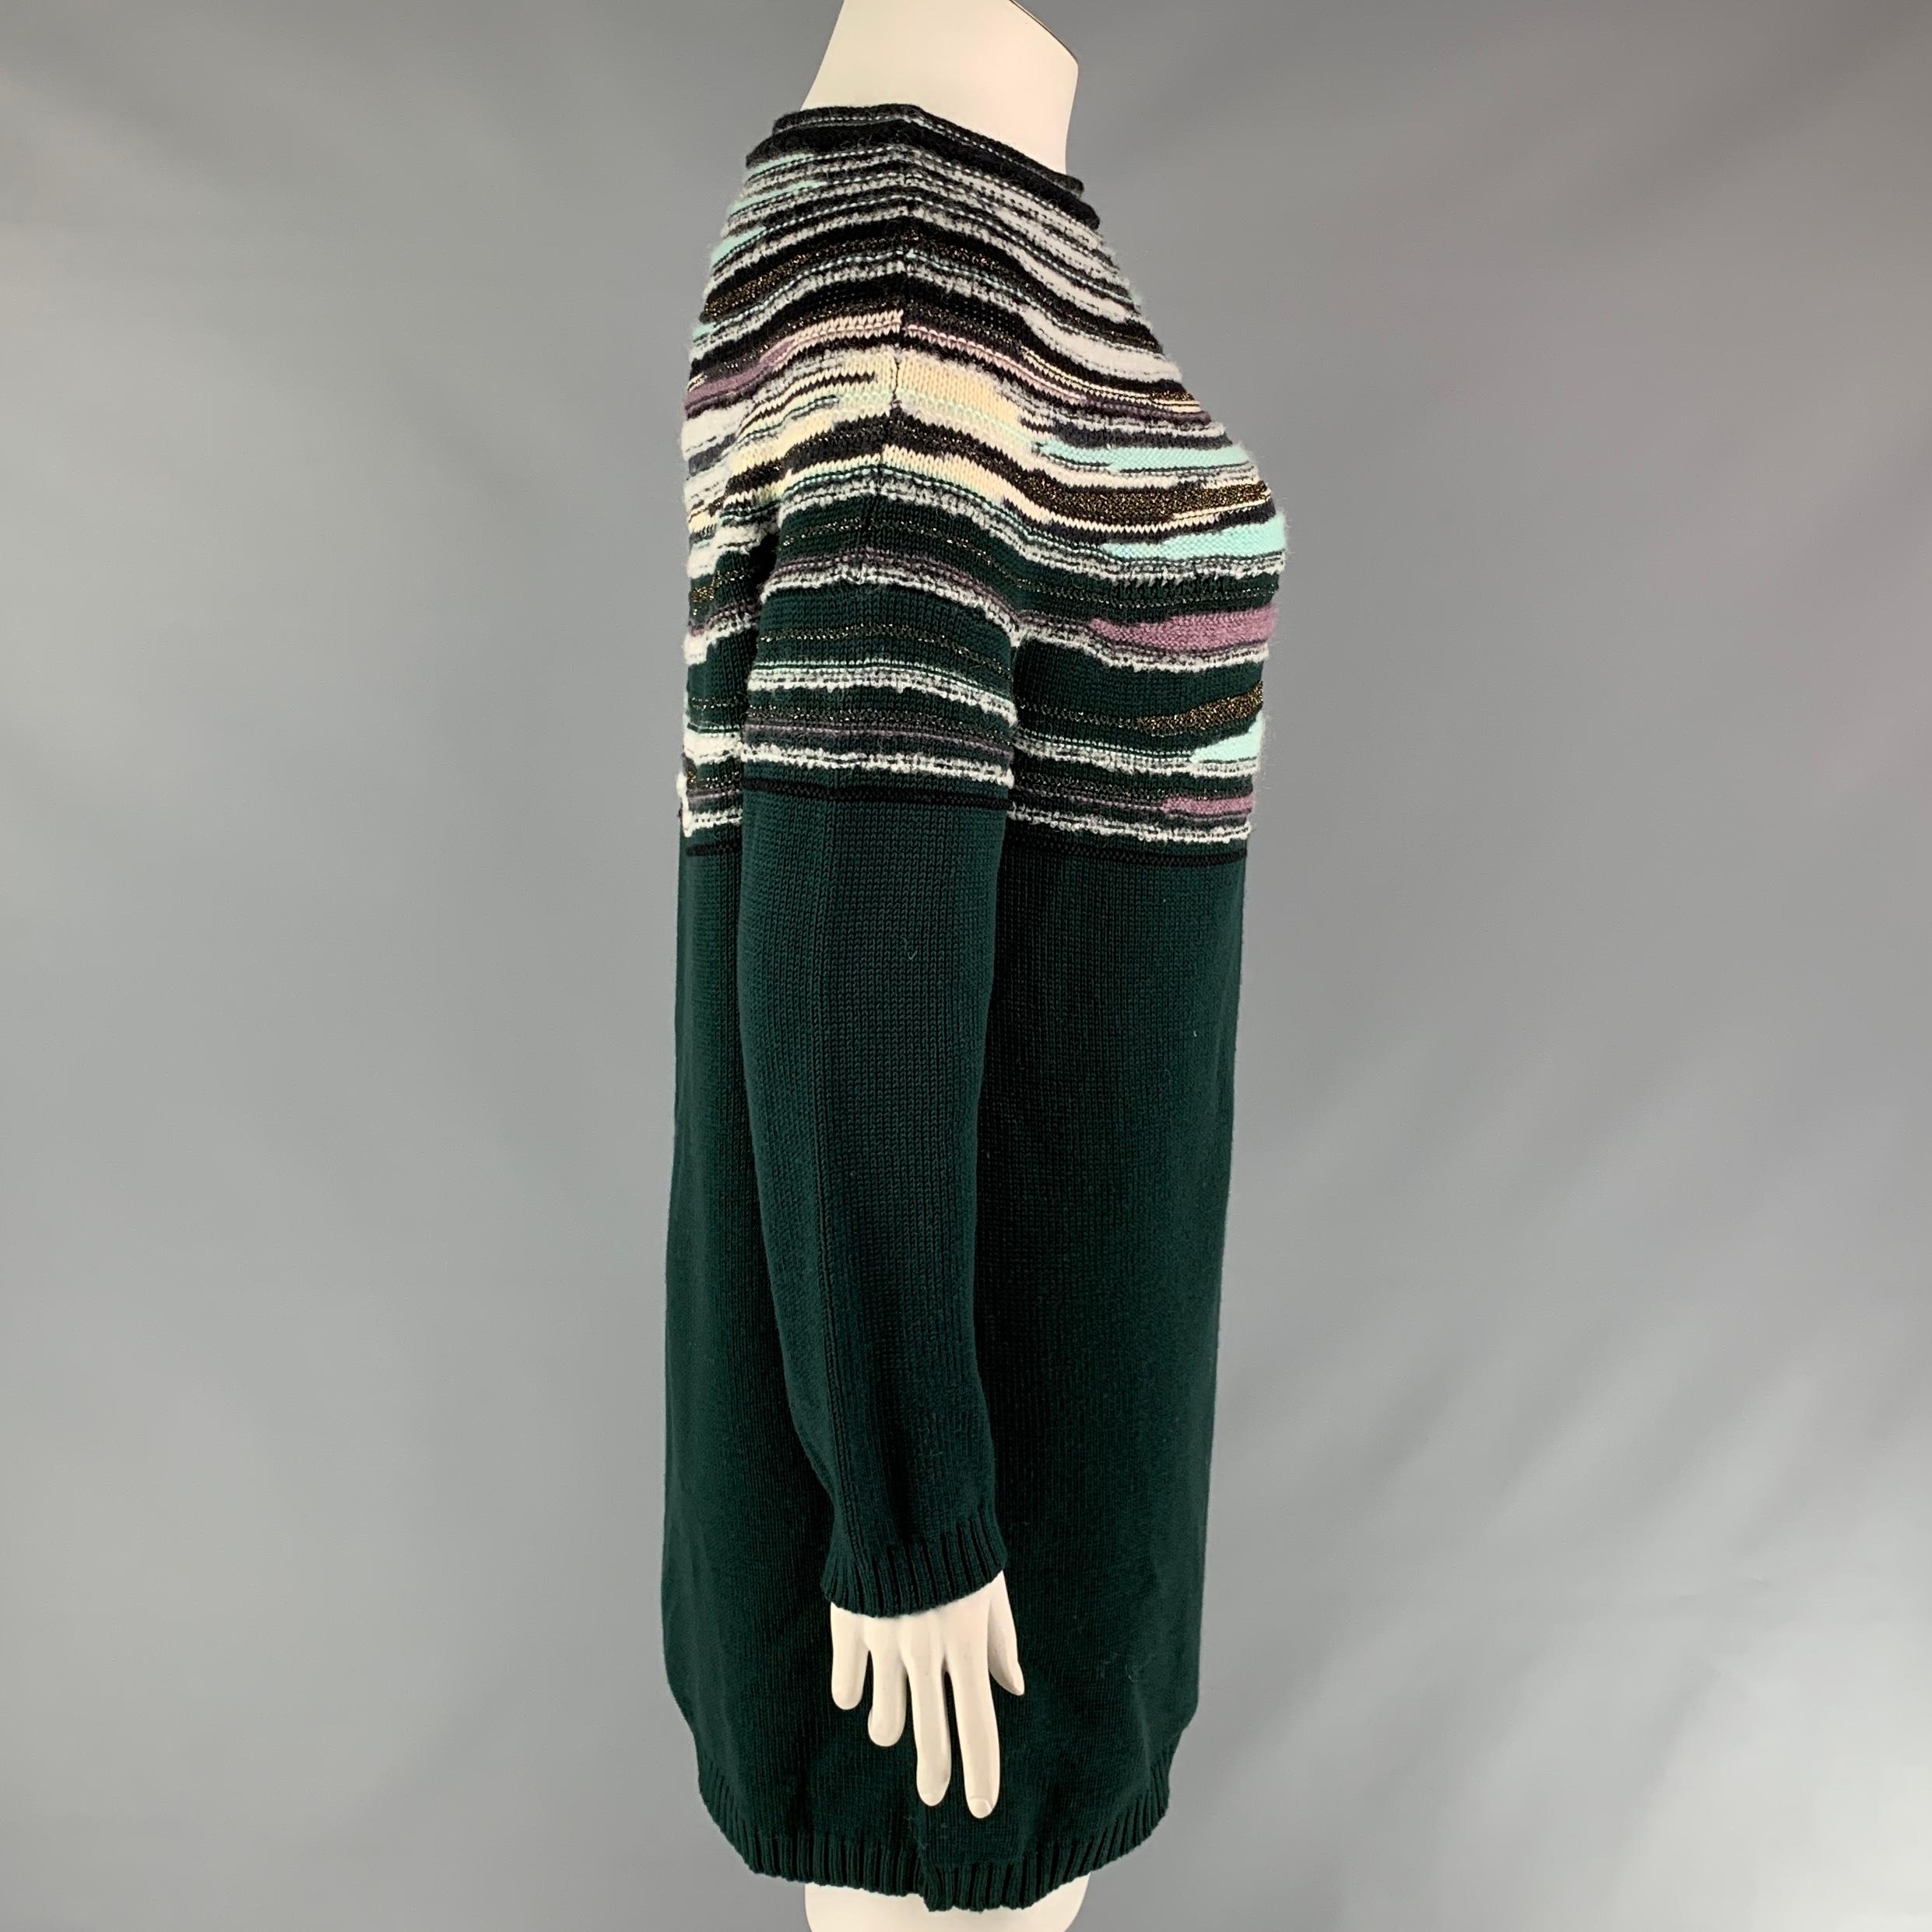 M MISSONI sweater comes in a multi-color knitted wool featuring long sleeves and a crew-neck. Made in Italy.

Very Good Pre-Owned Condition.
Marked: I 48 / D CH 42 / A NL 42 / EFB 44 / GB 16 / USA 12

Measurements:

Shoulder: 24 in.
Bust: 46